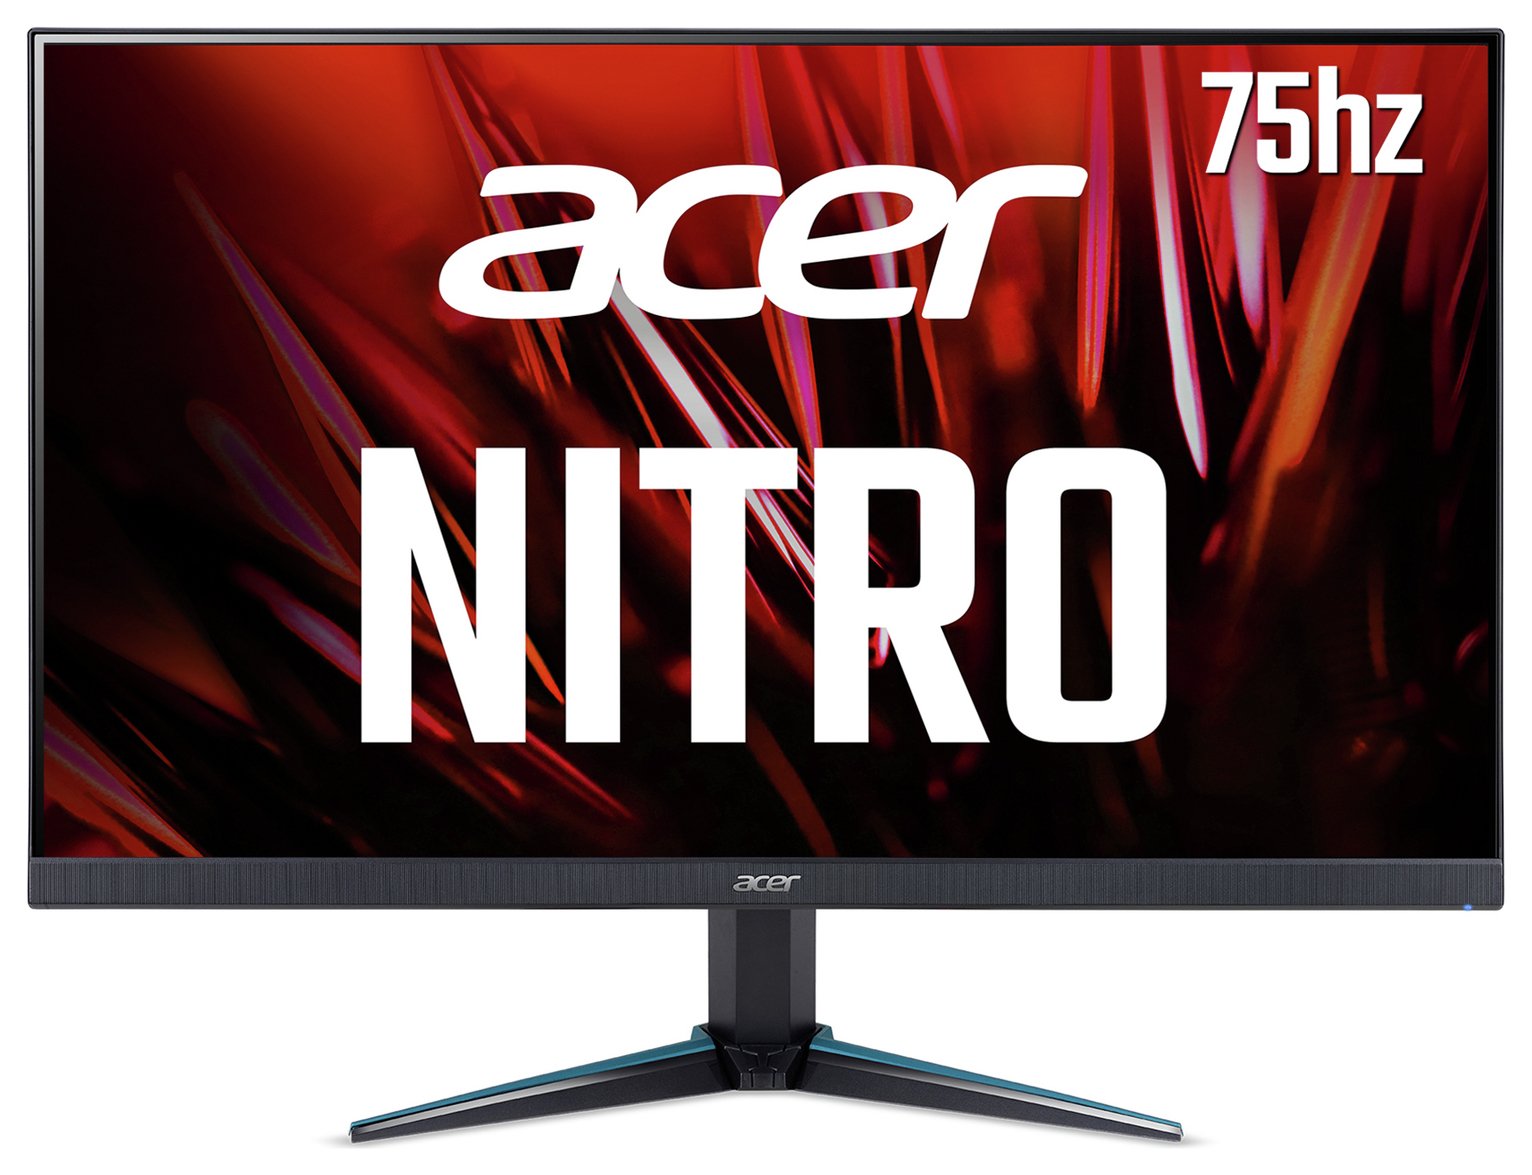 Acer Nitro VG270U 27in 75Hz IPS WQHD Gaming Monitor Review